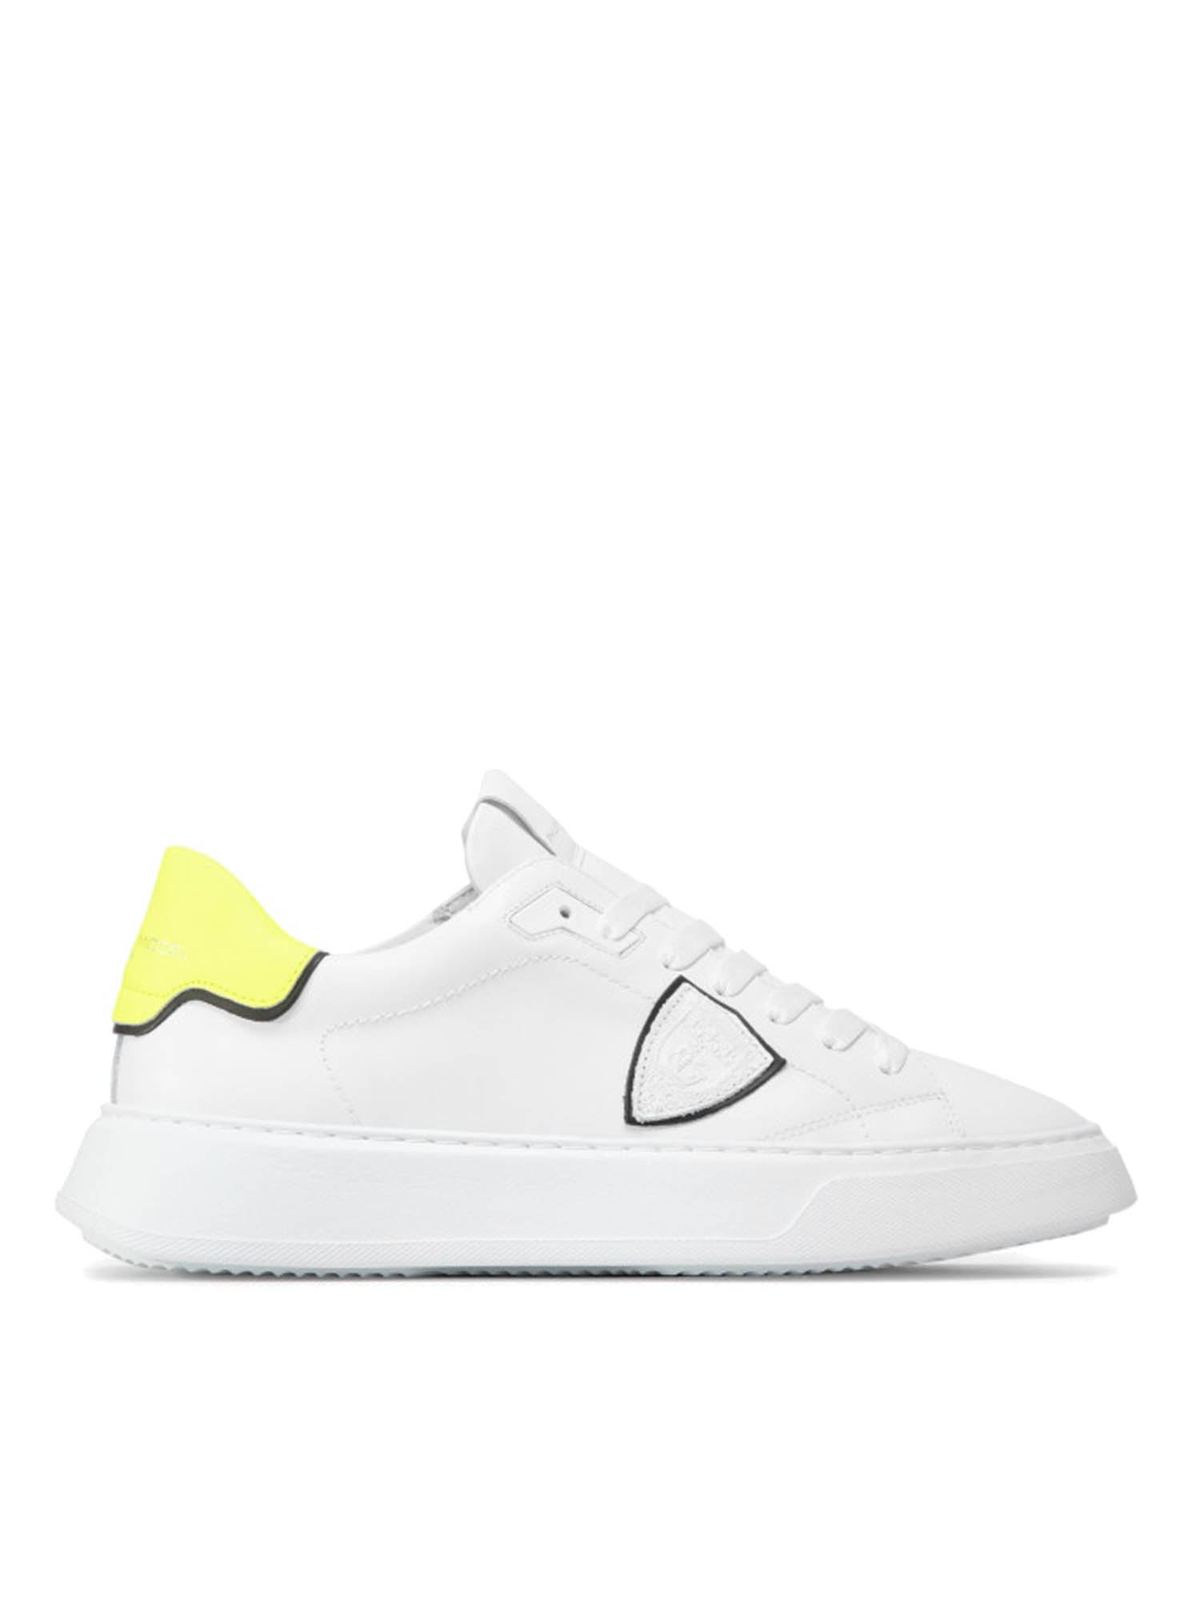 Temple Veau sneakers in white and neon yellow